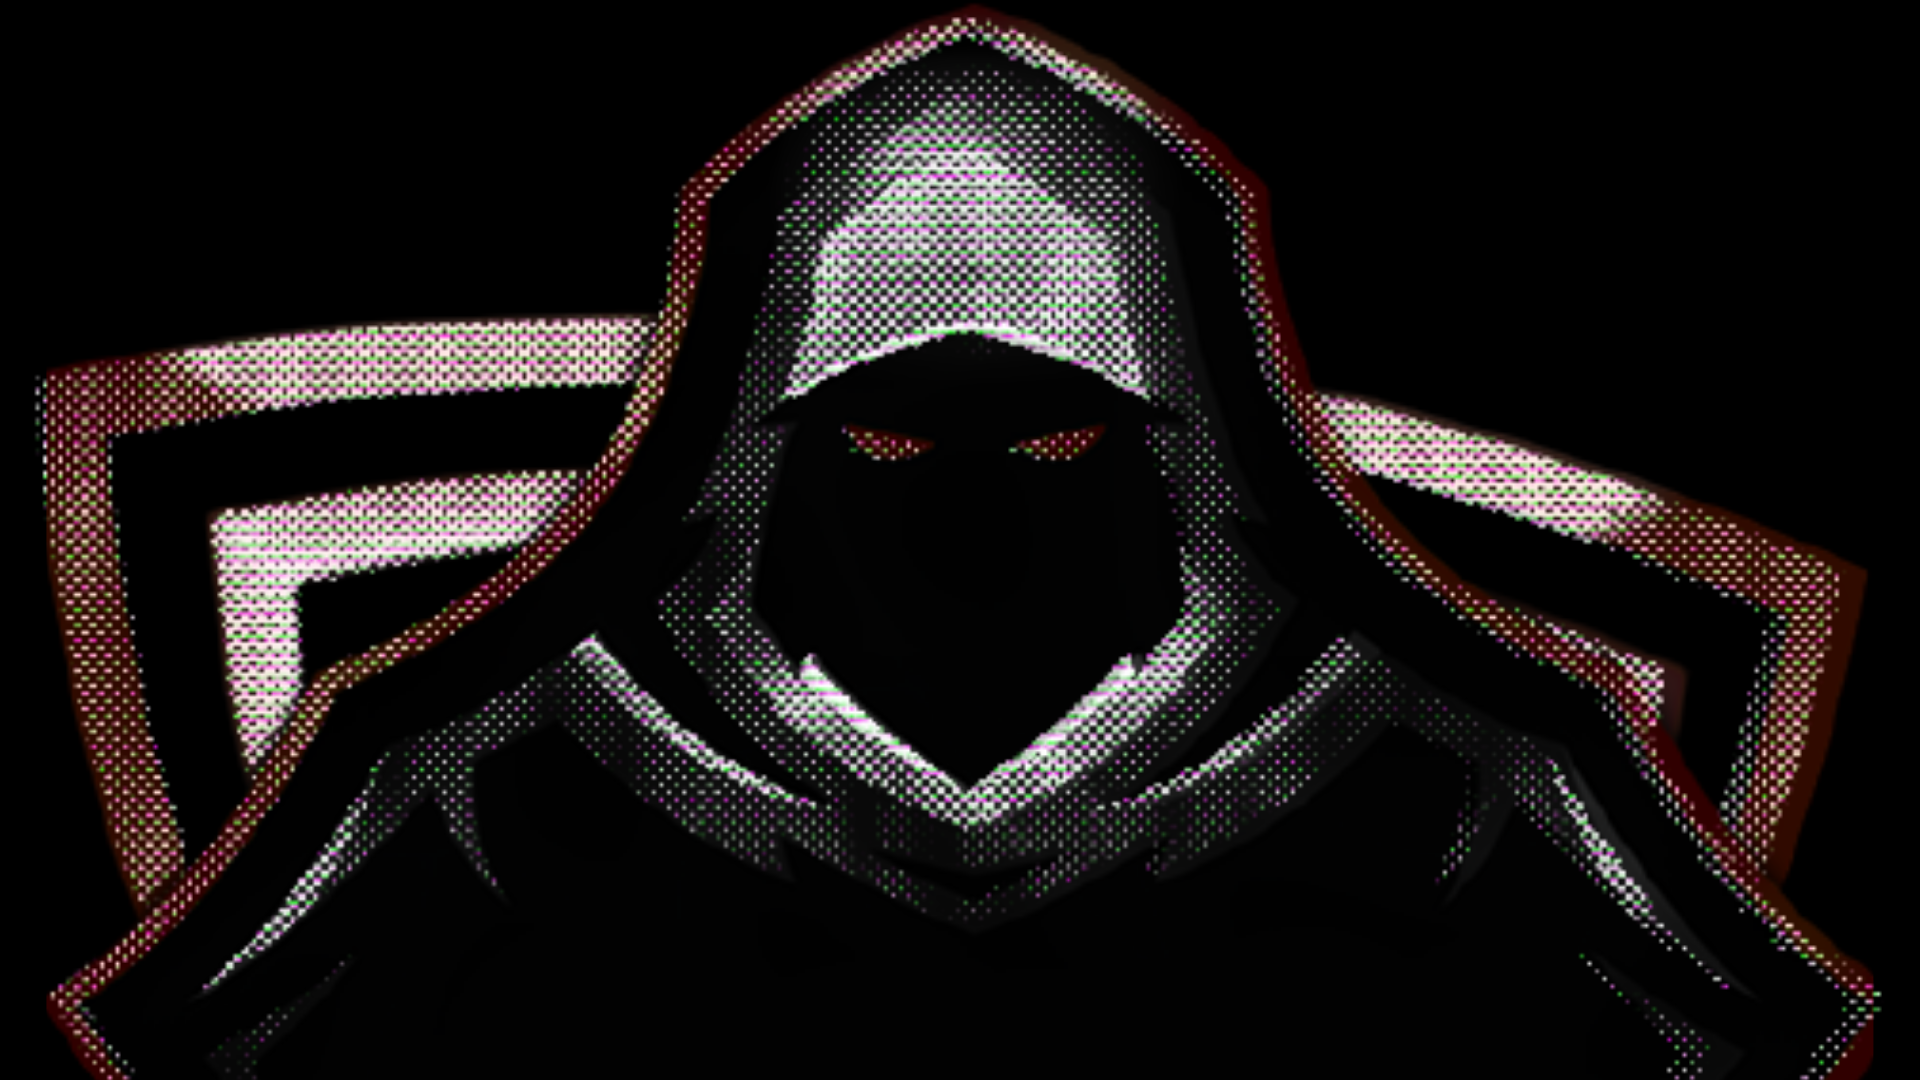 General 1920x1080 Outlaw e-sports video games PC gaming video game art simple background red eyes hoods black background